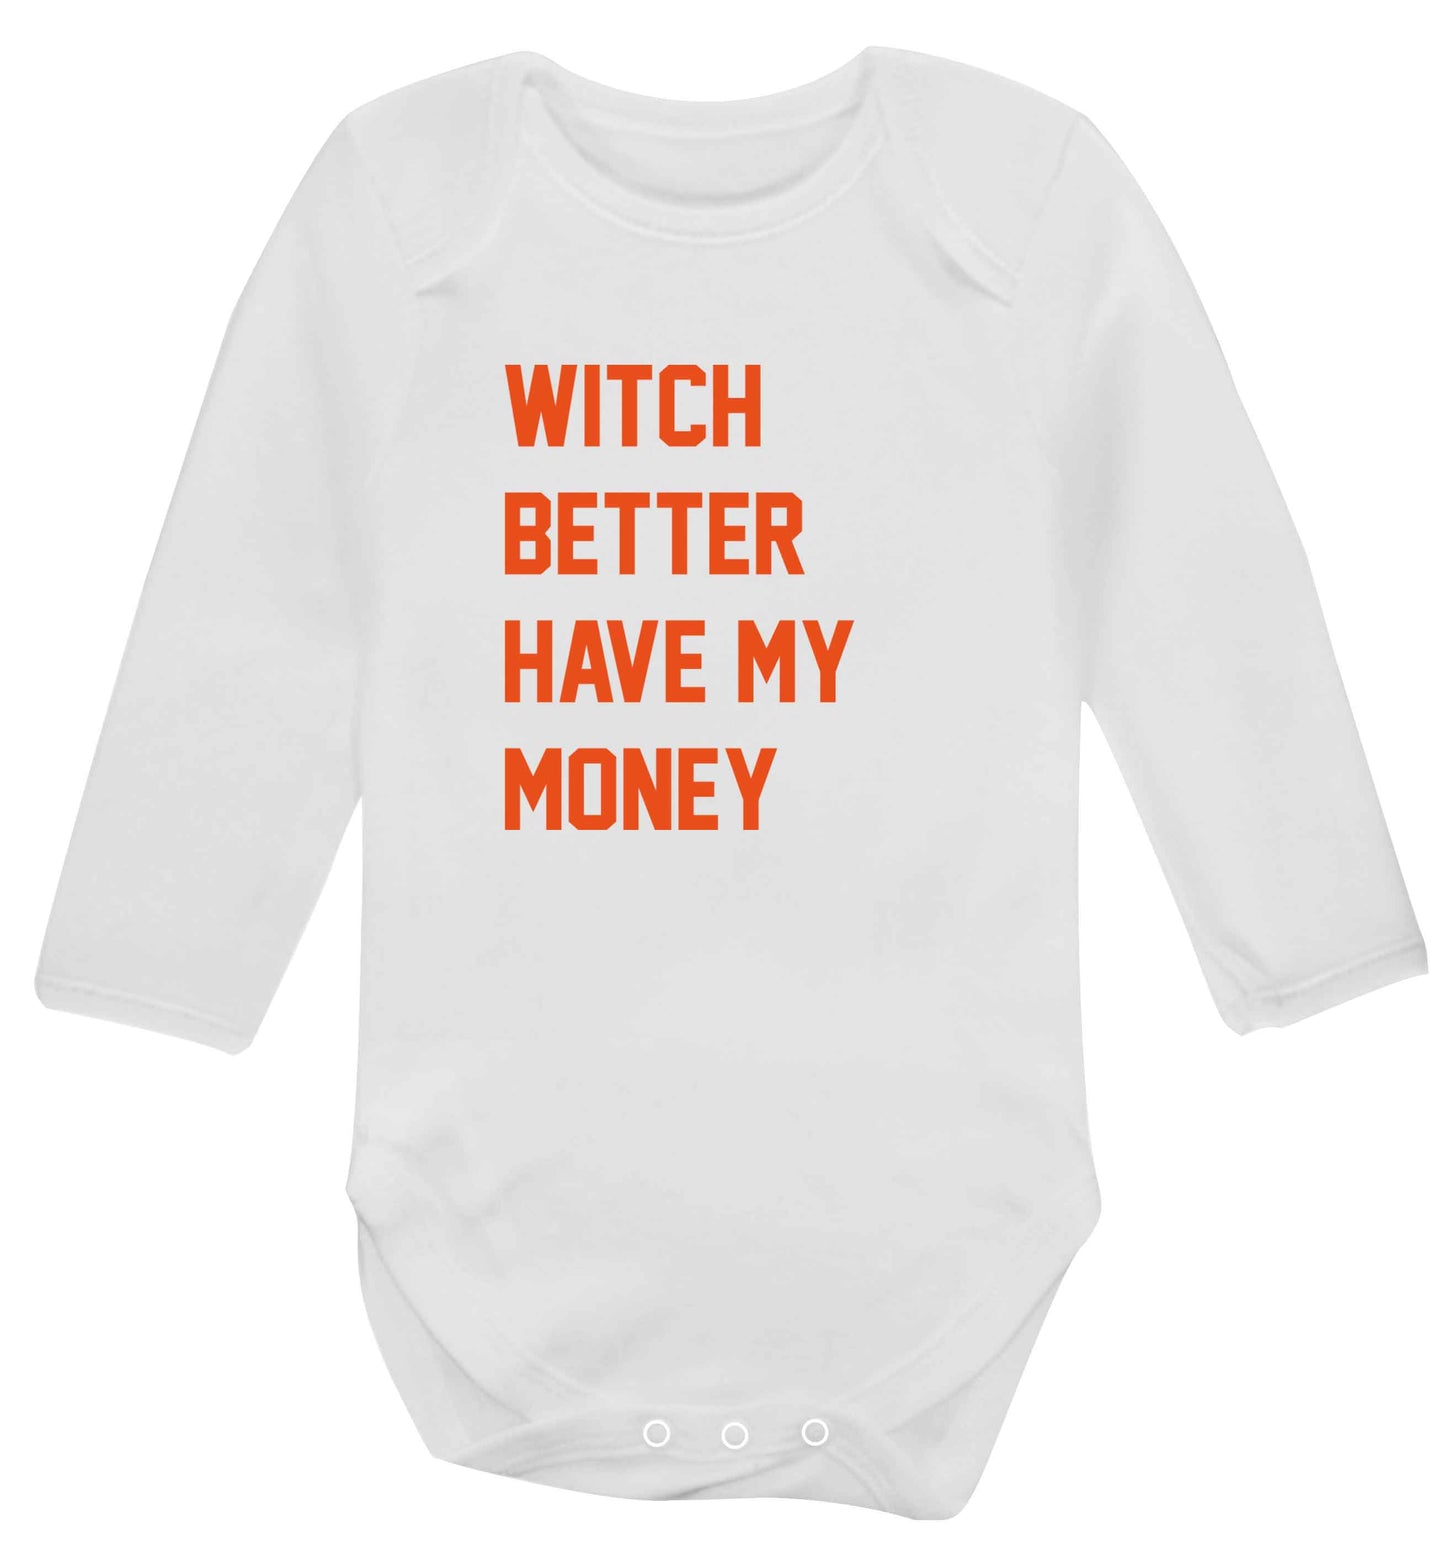 Witch better have my money baby vest long sleeved white 6-12 months